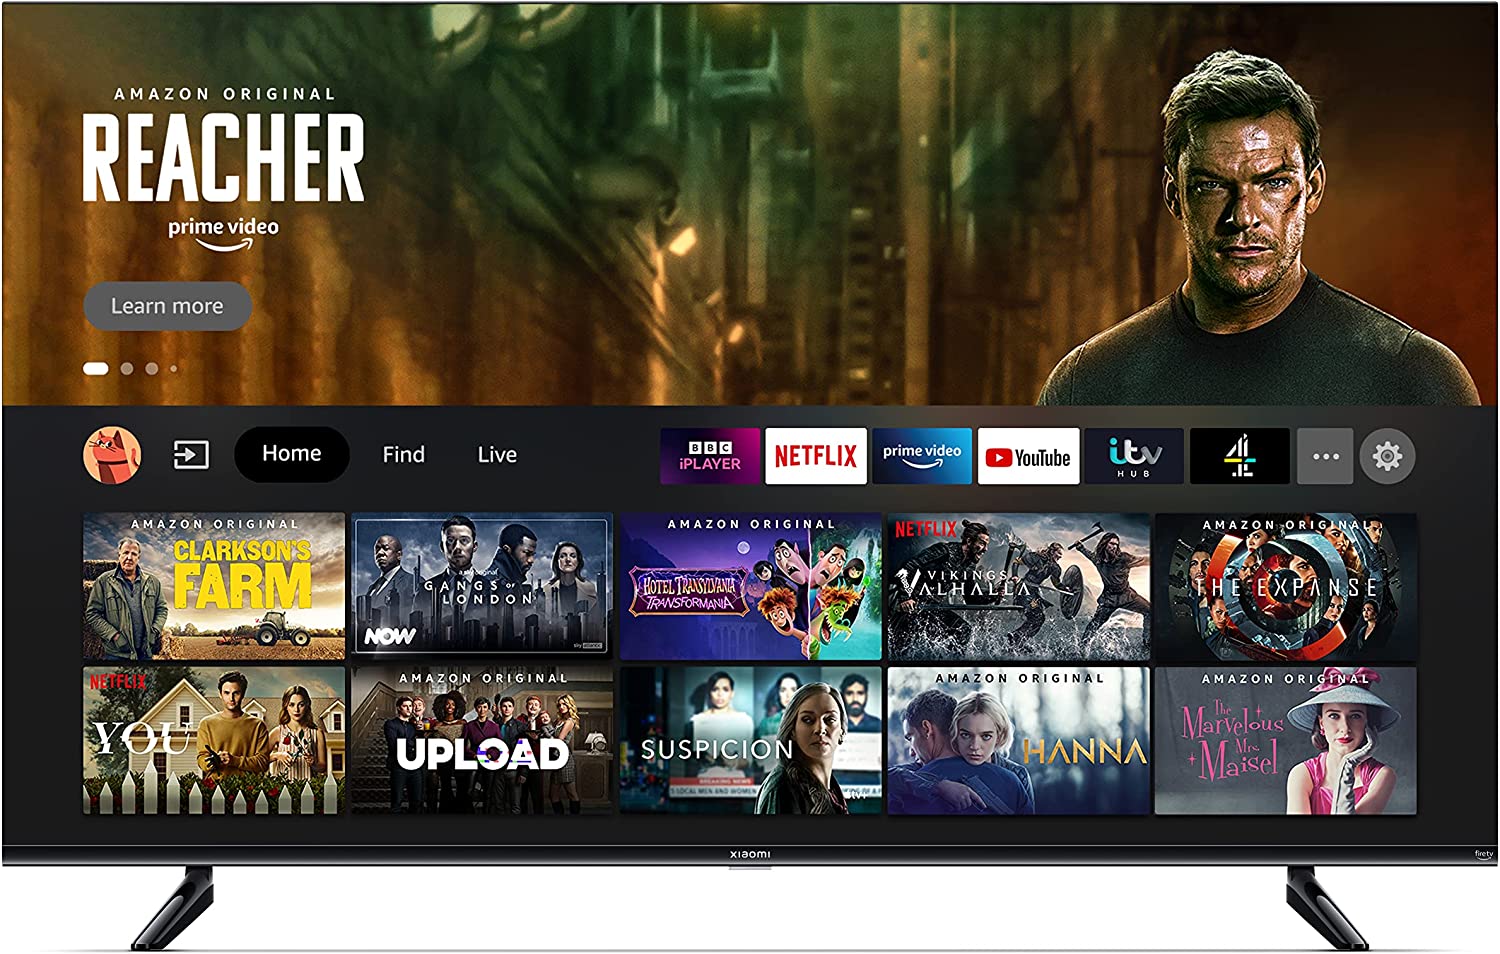 Smart TV has a wide variety of streaming platforms available.